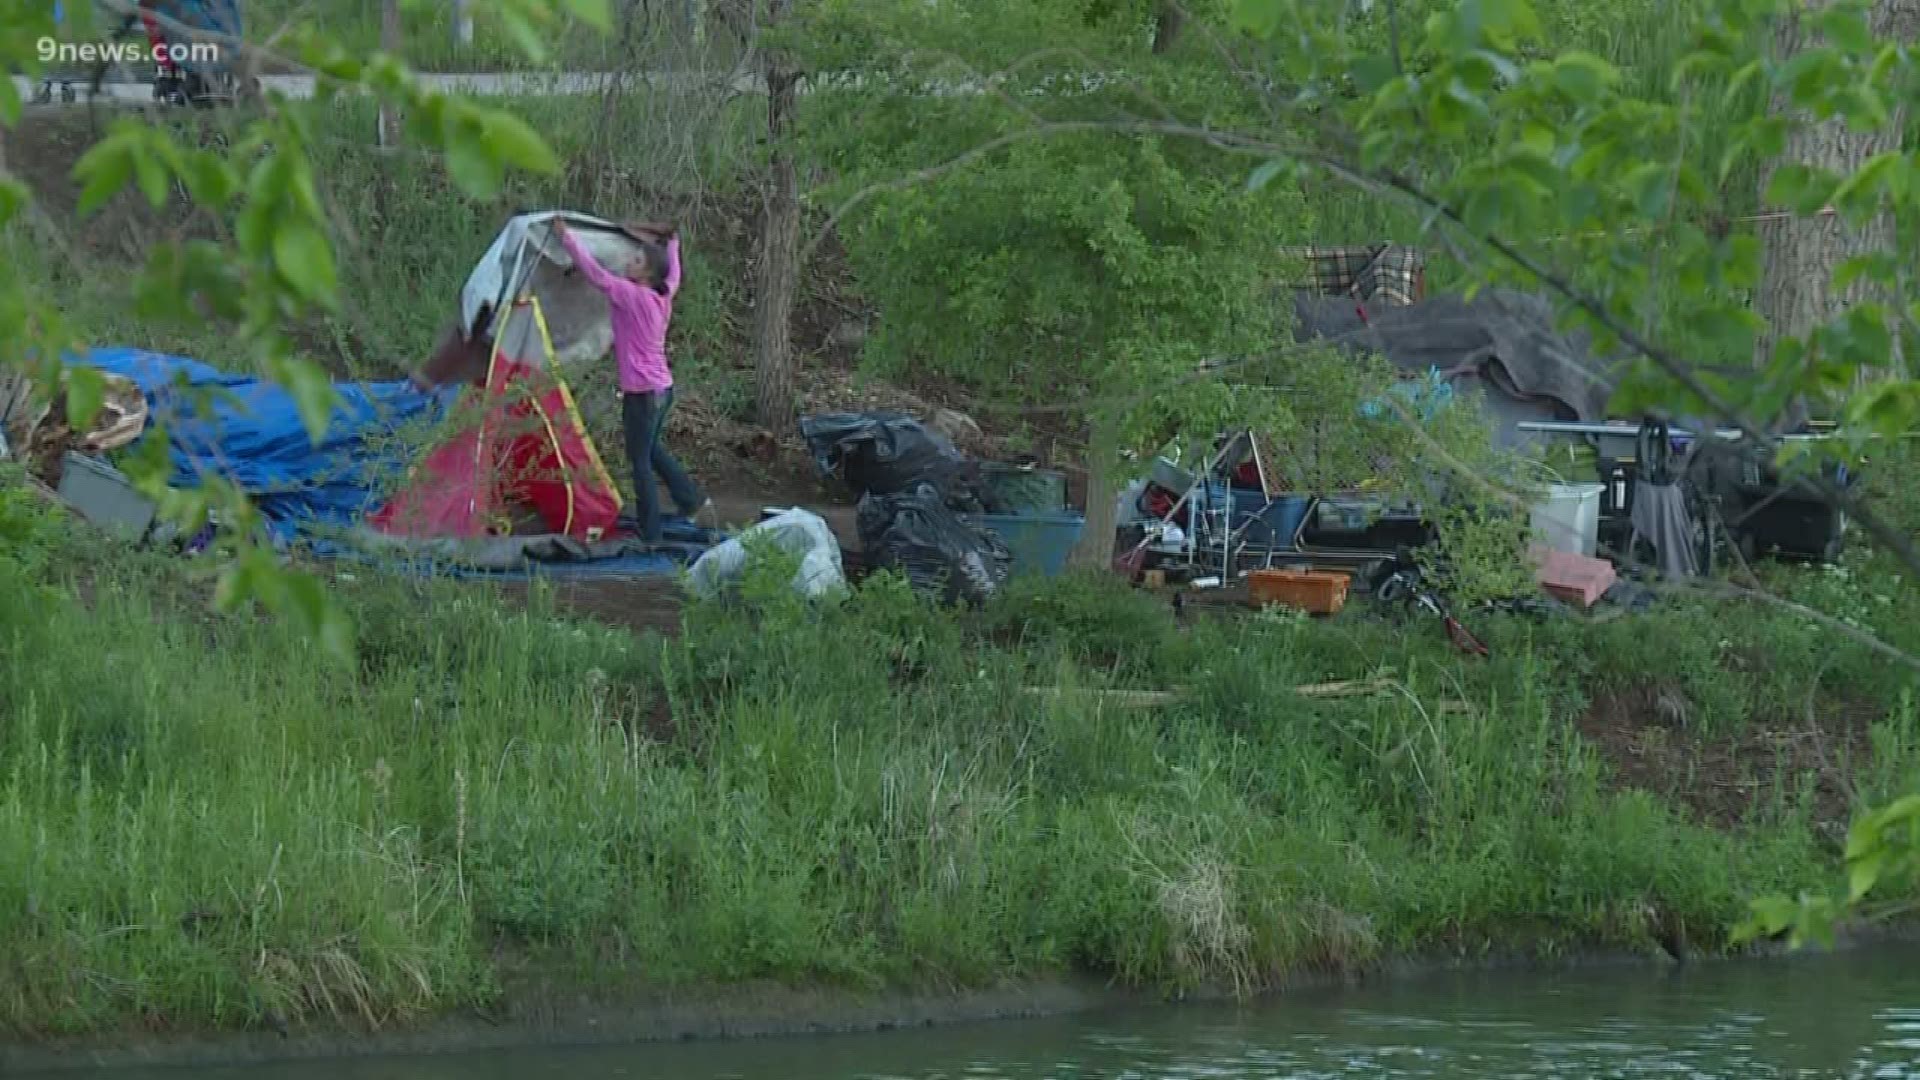 The City of Englewood and other local agencies are removing a homeless camp along the banks of the South Platte River. And one homeless advocate is going above and beyond to lend a helping hand.